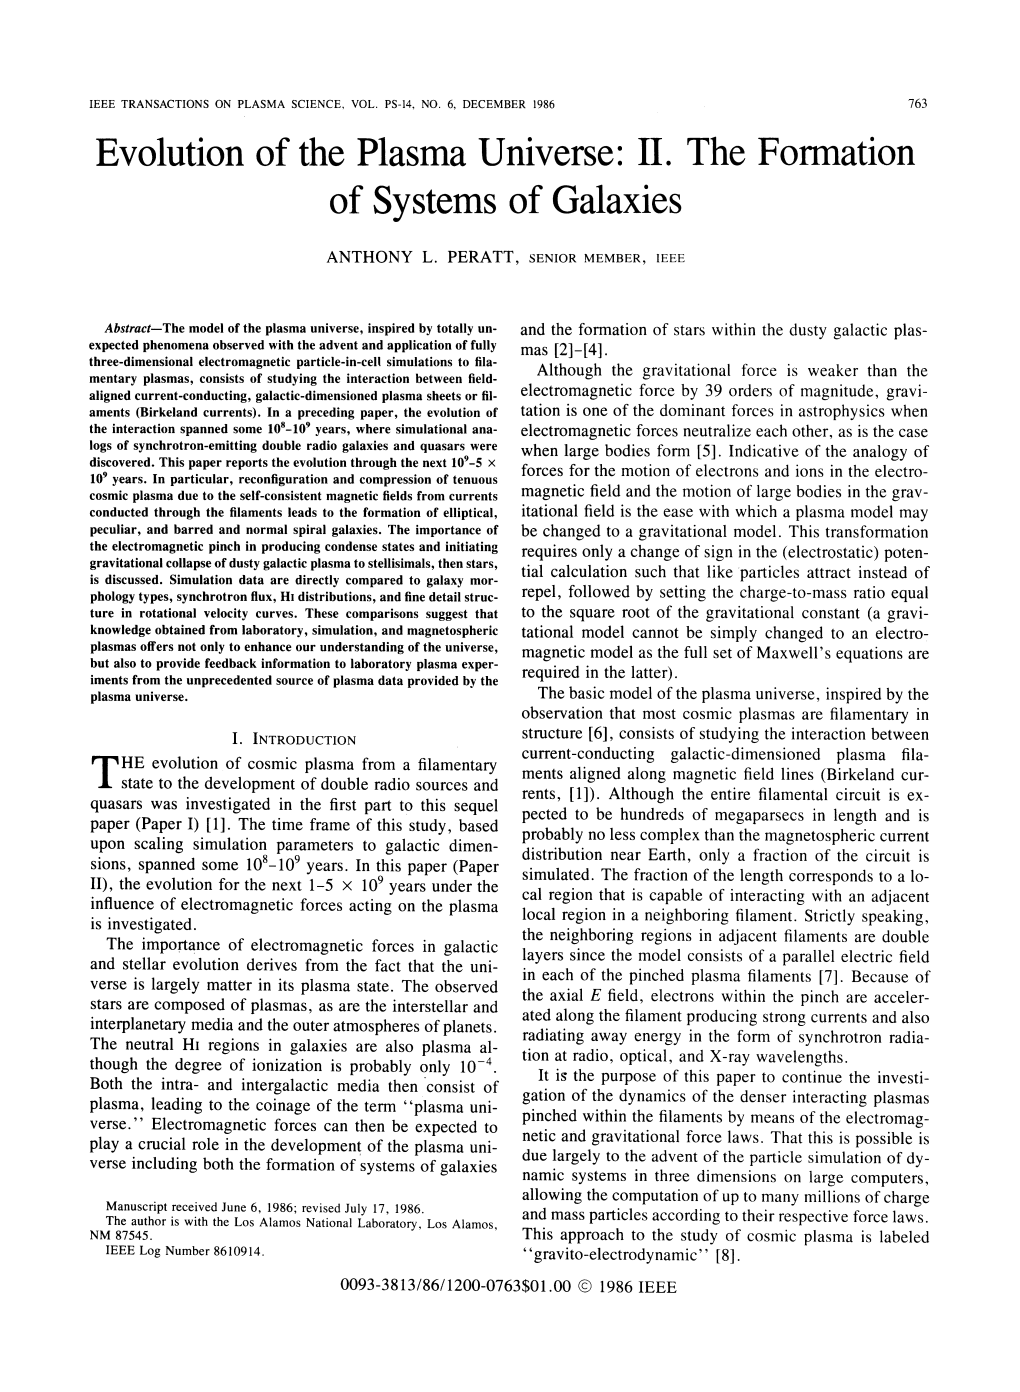 Of Systems of Galaxies